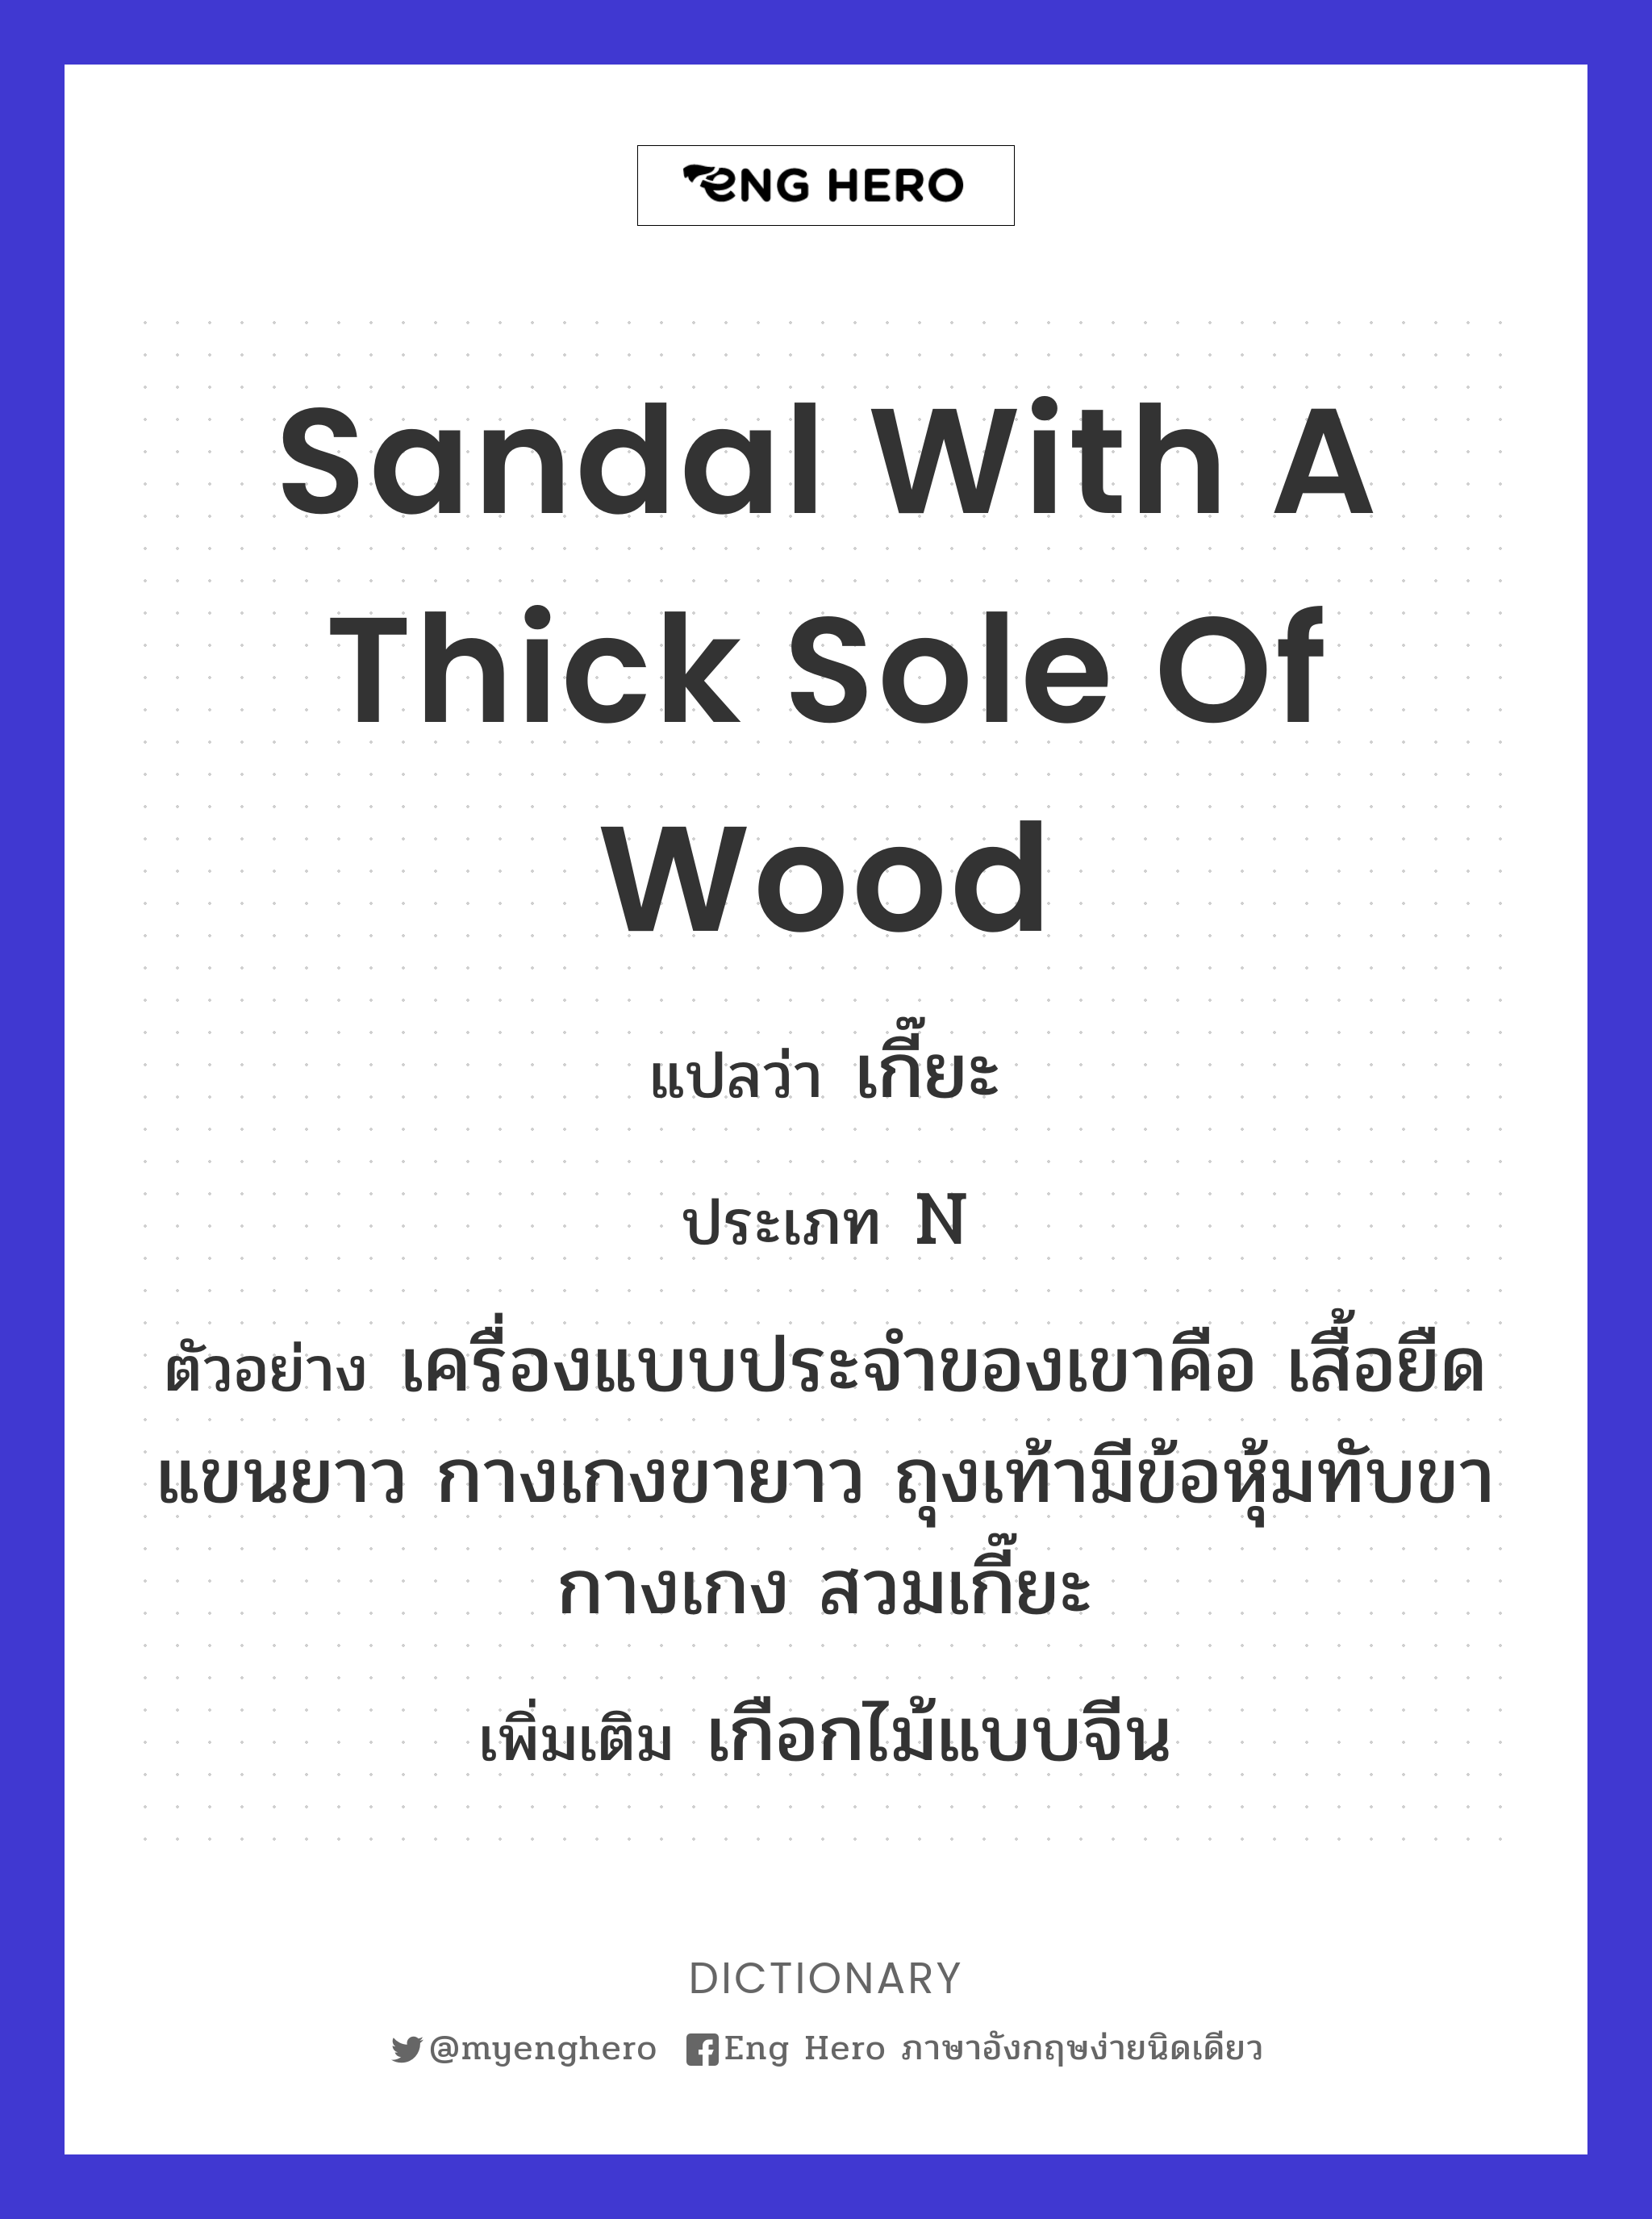 sandal with a thick sole of wood